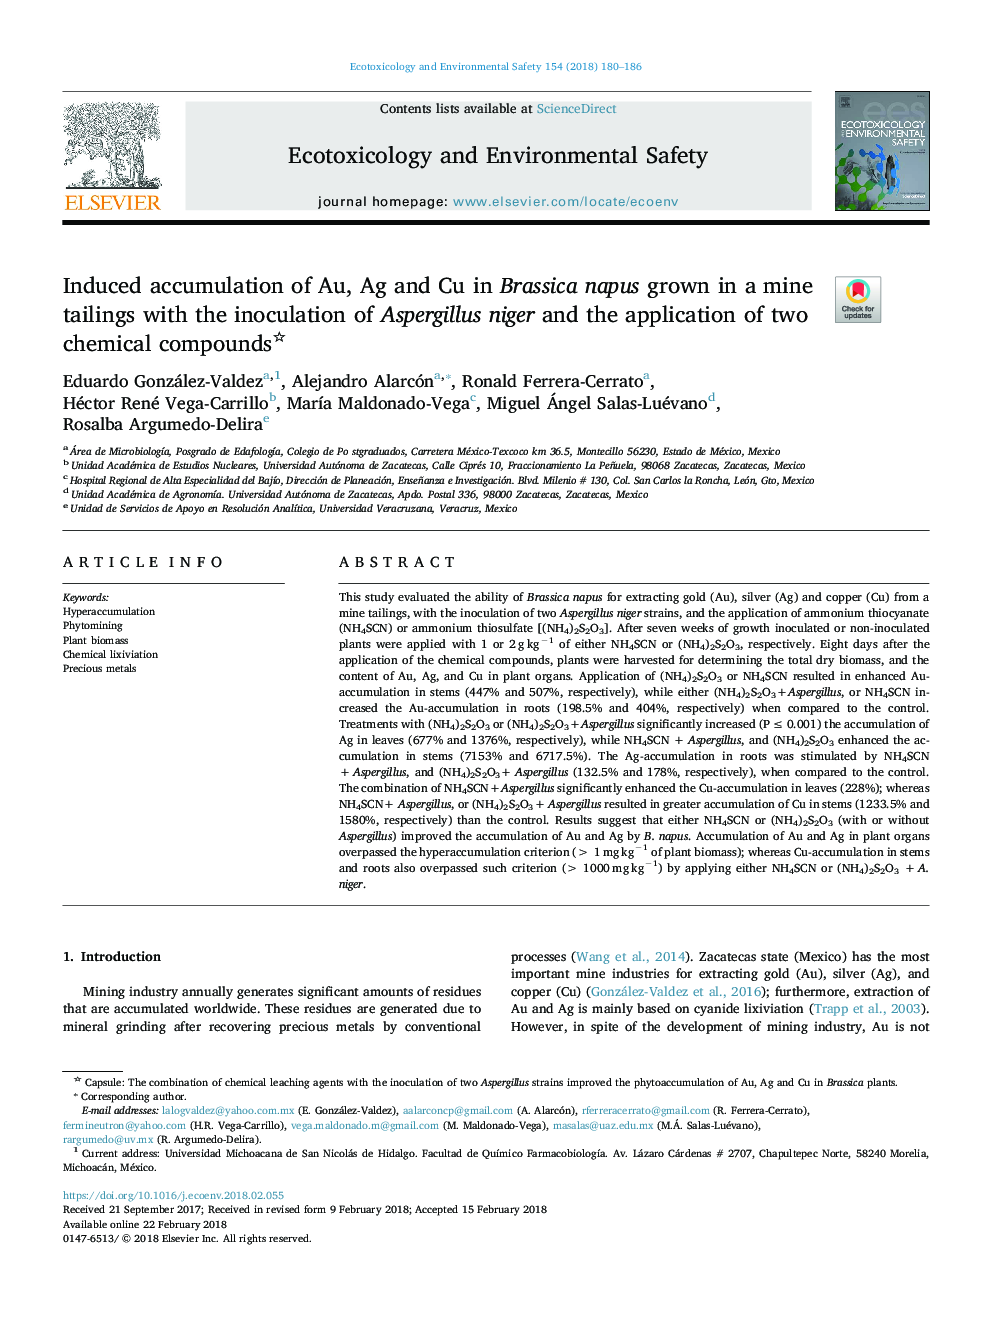 Induced accumulation of Au, Ag and Cu in Brassica napus grown in a mine tailings with the inoculation of Aspergillus niger and the application of two chemical compounds